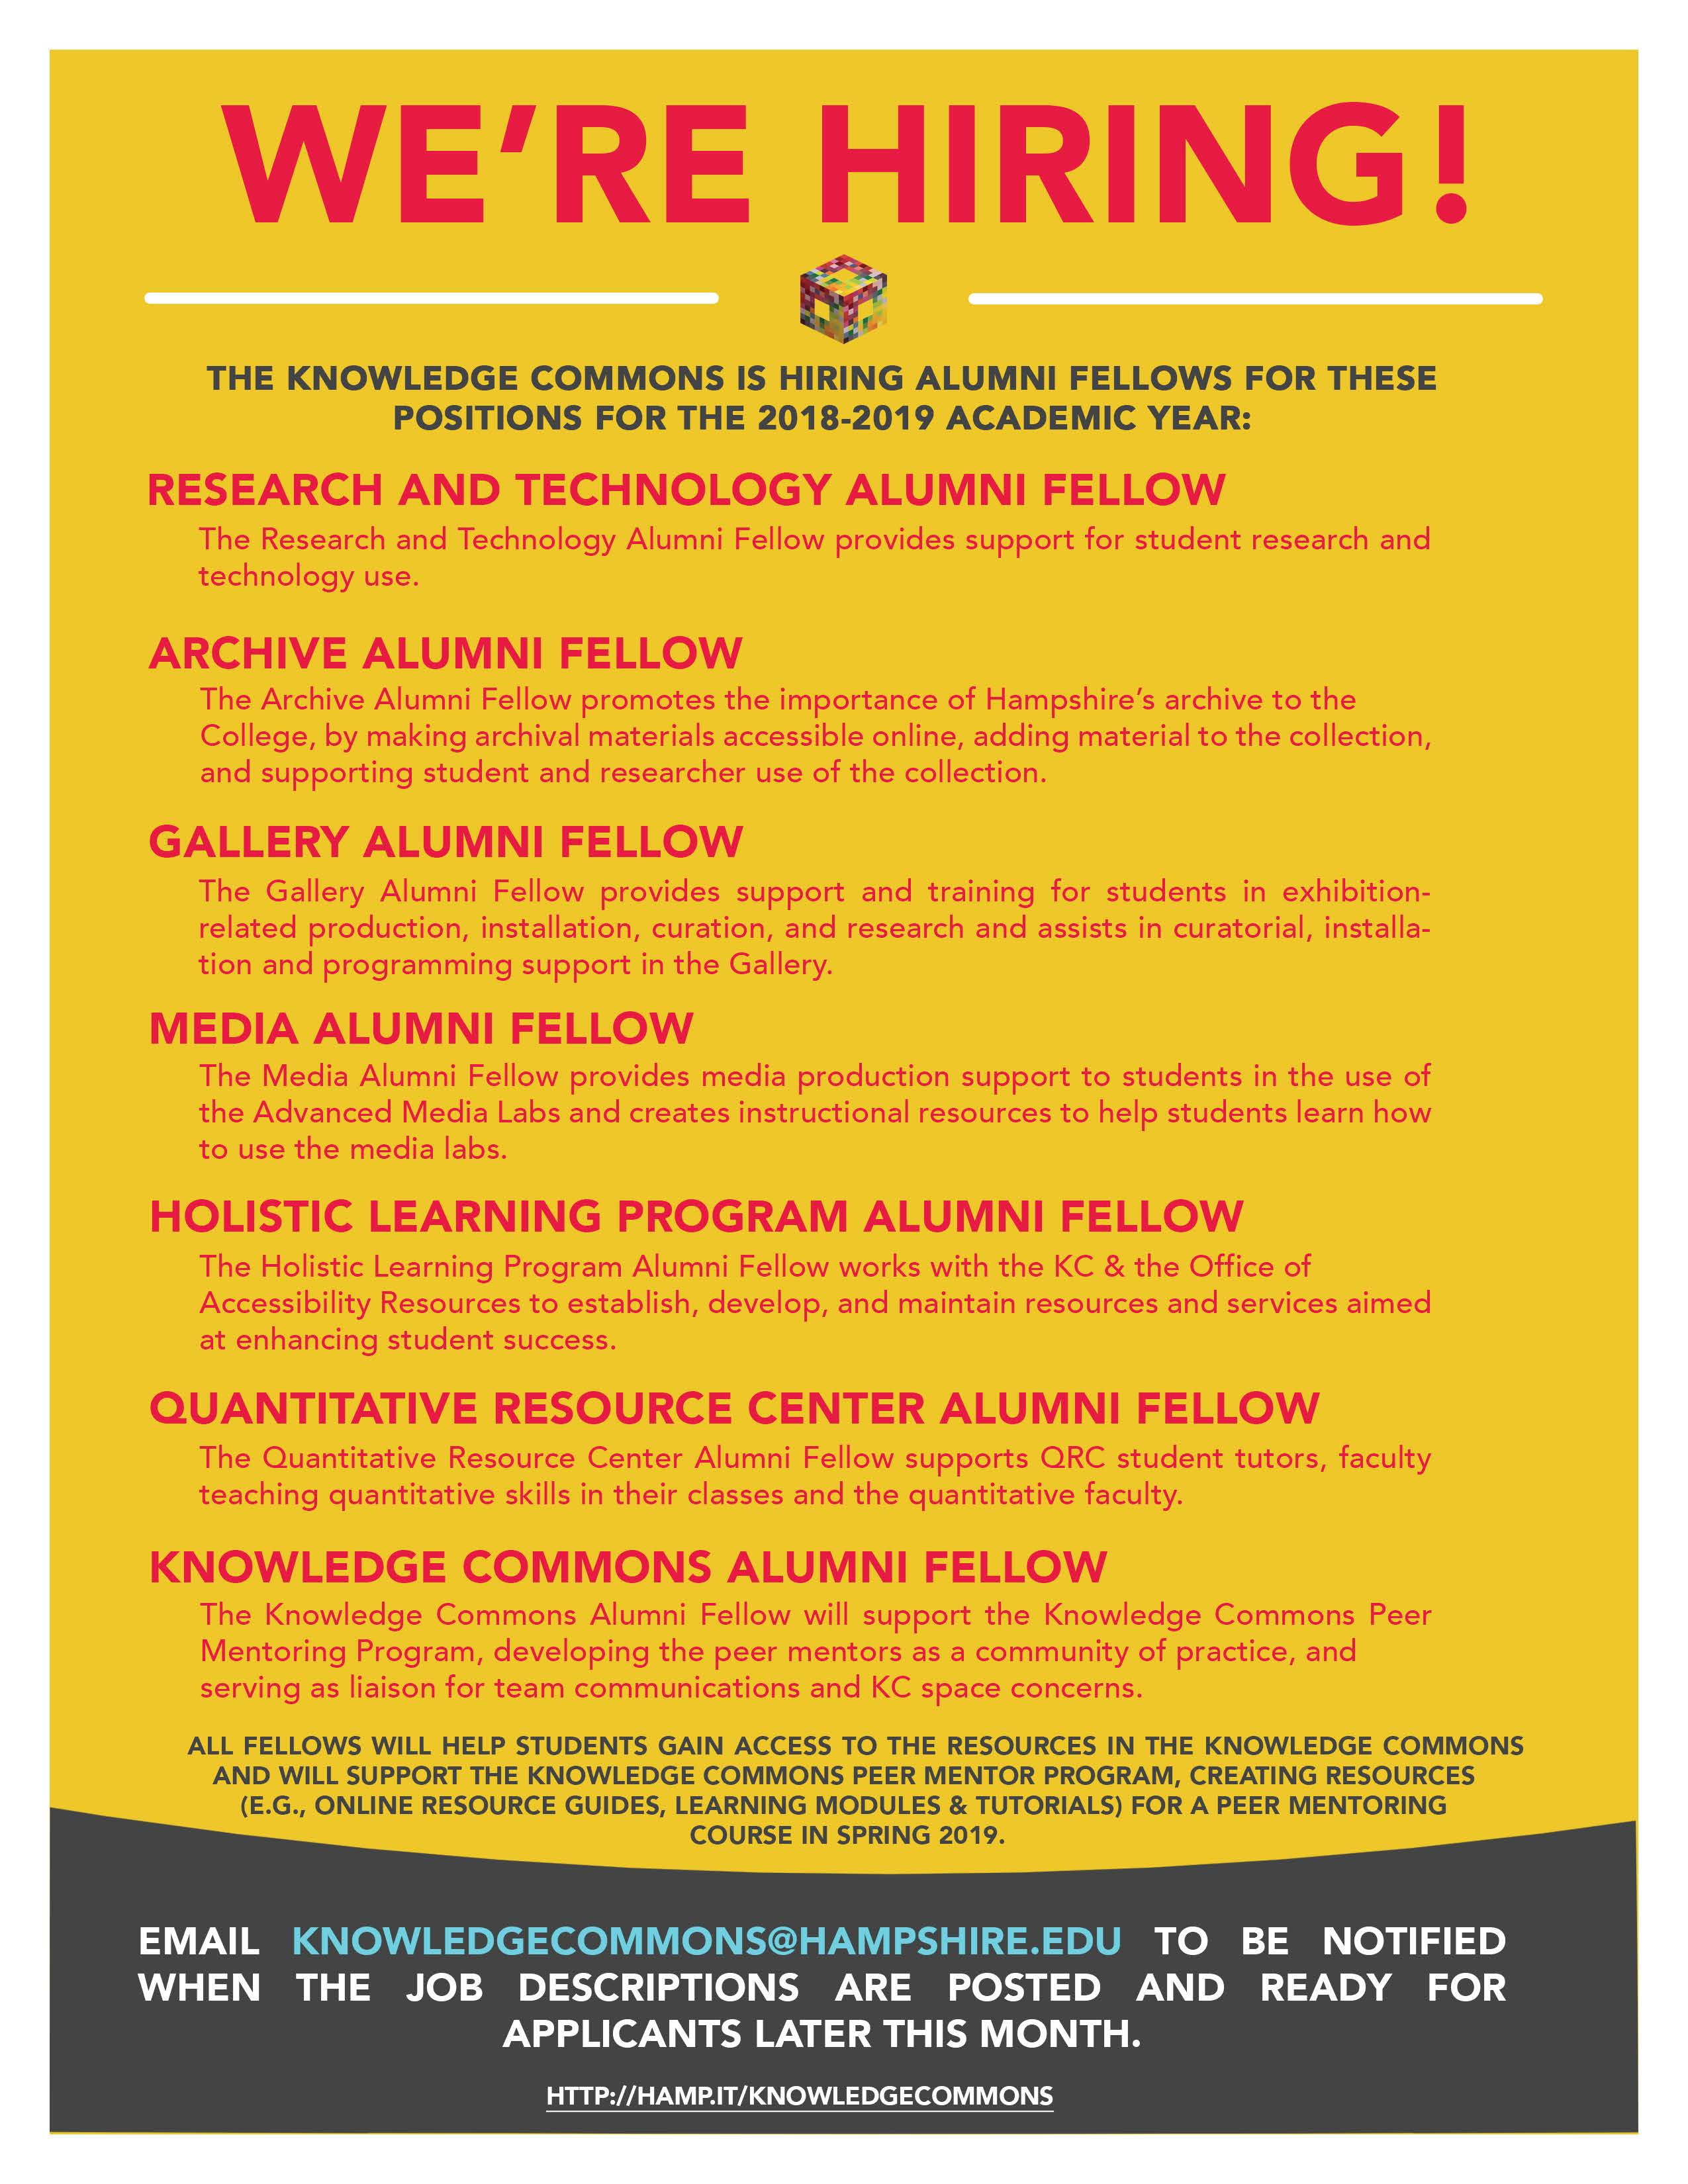 Knowledge Commons Alumni Fellow Positions